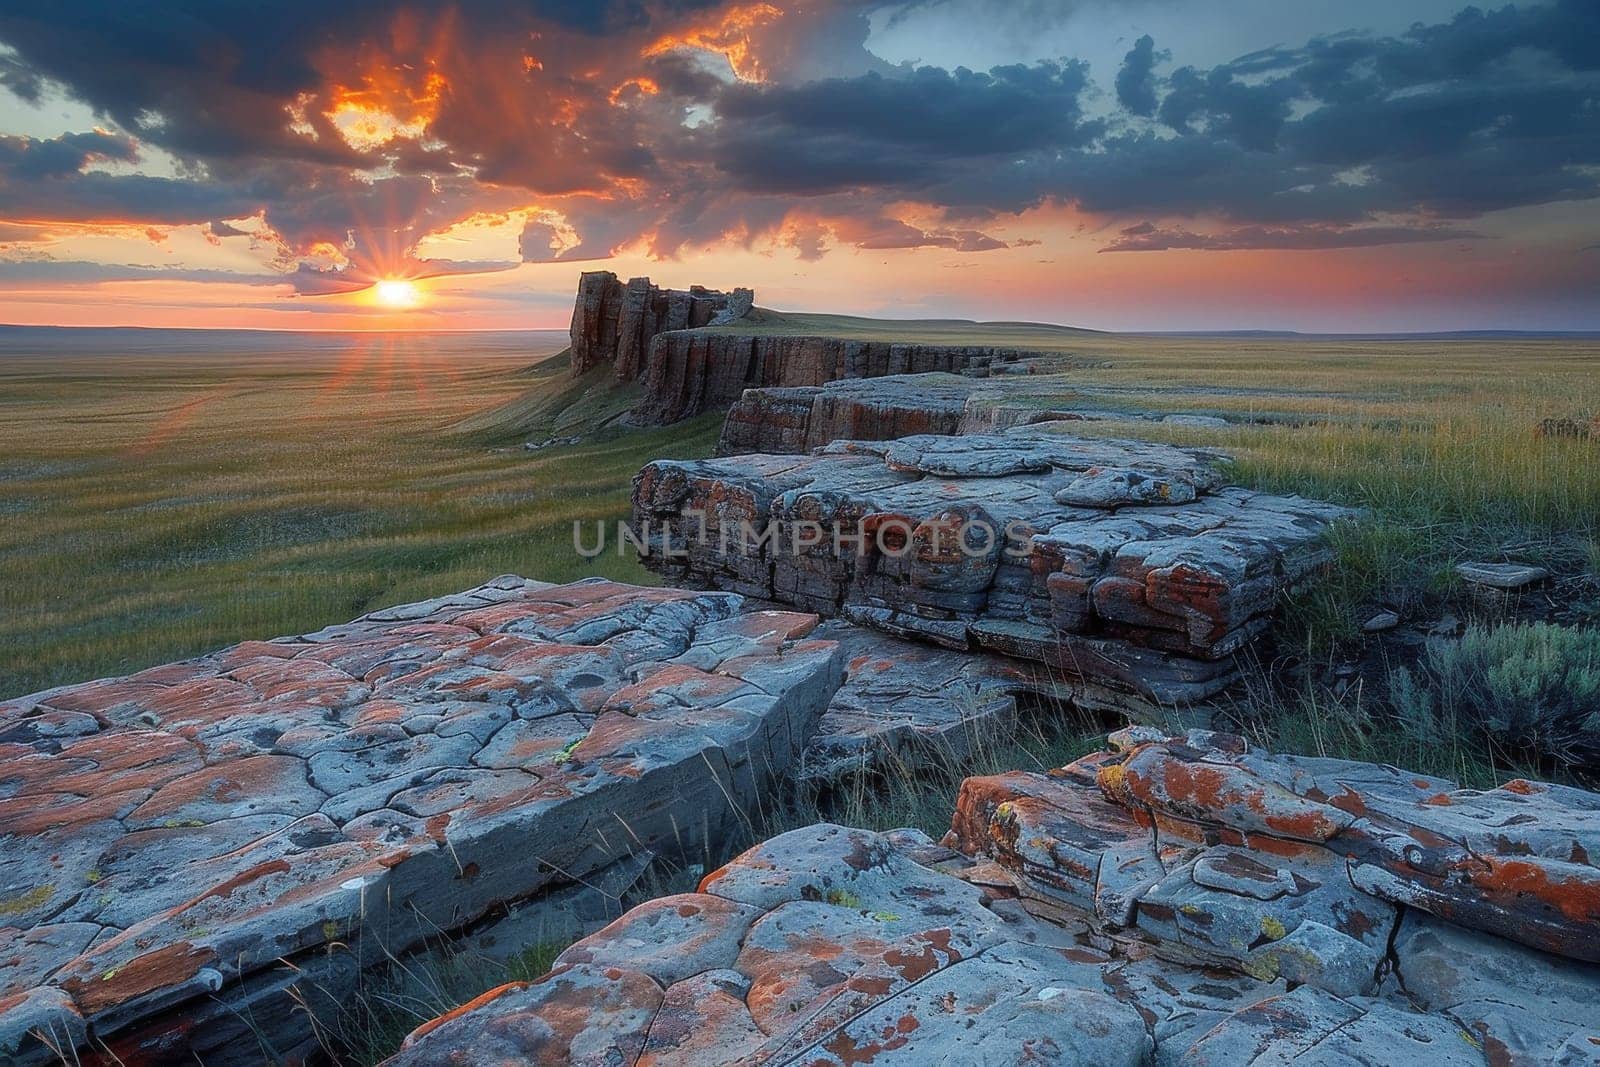 A rocky landscape with a sunset in the background. The sky is filled with clouds, and the sun is setting behind the rocks. Scene is serene and peaceful, as the sun sets over the rocky terrain